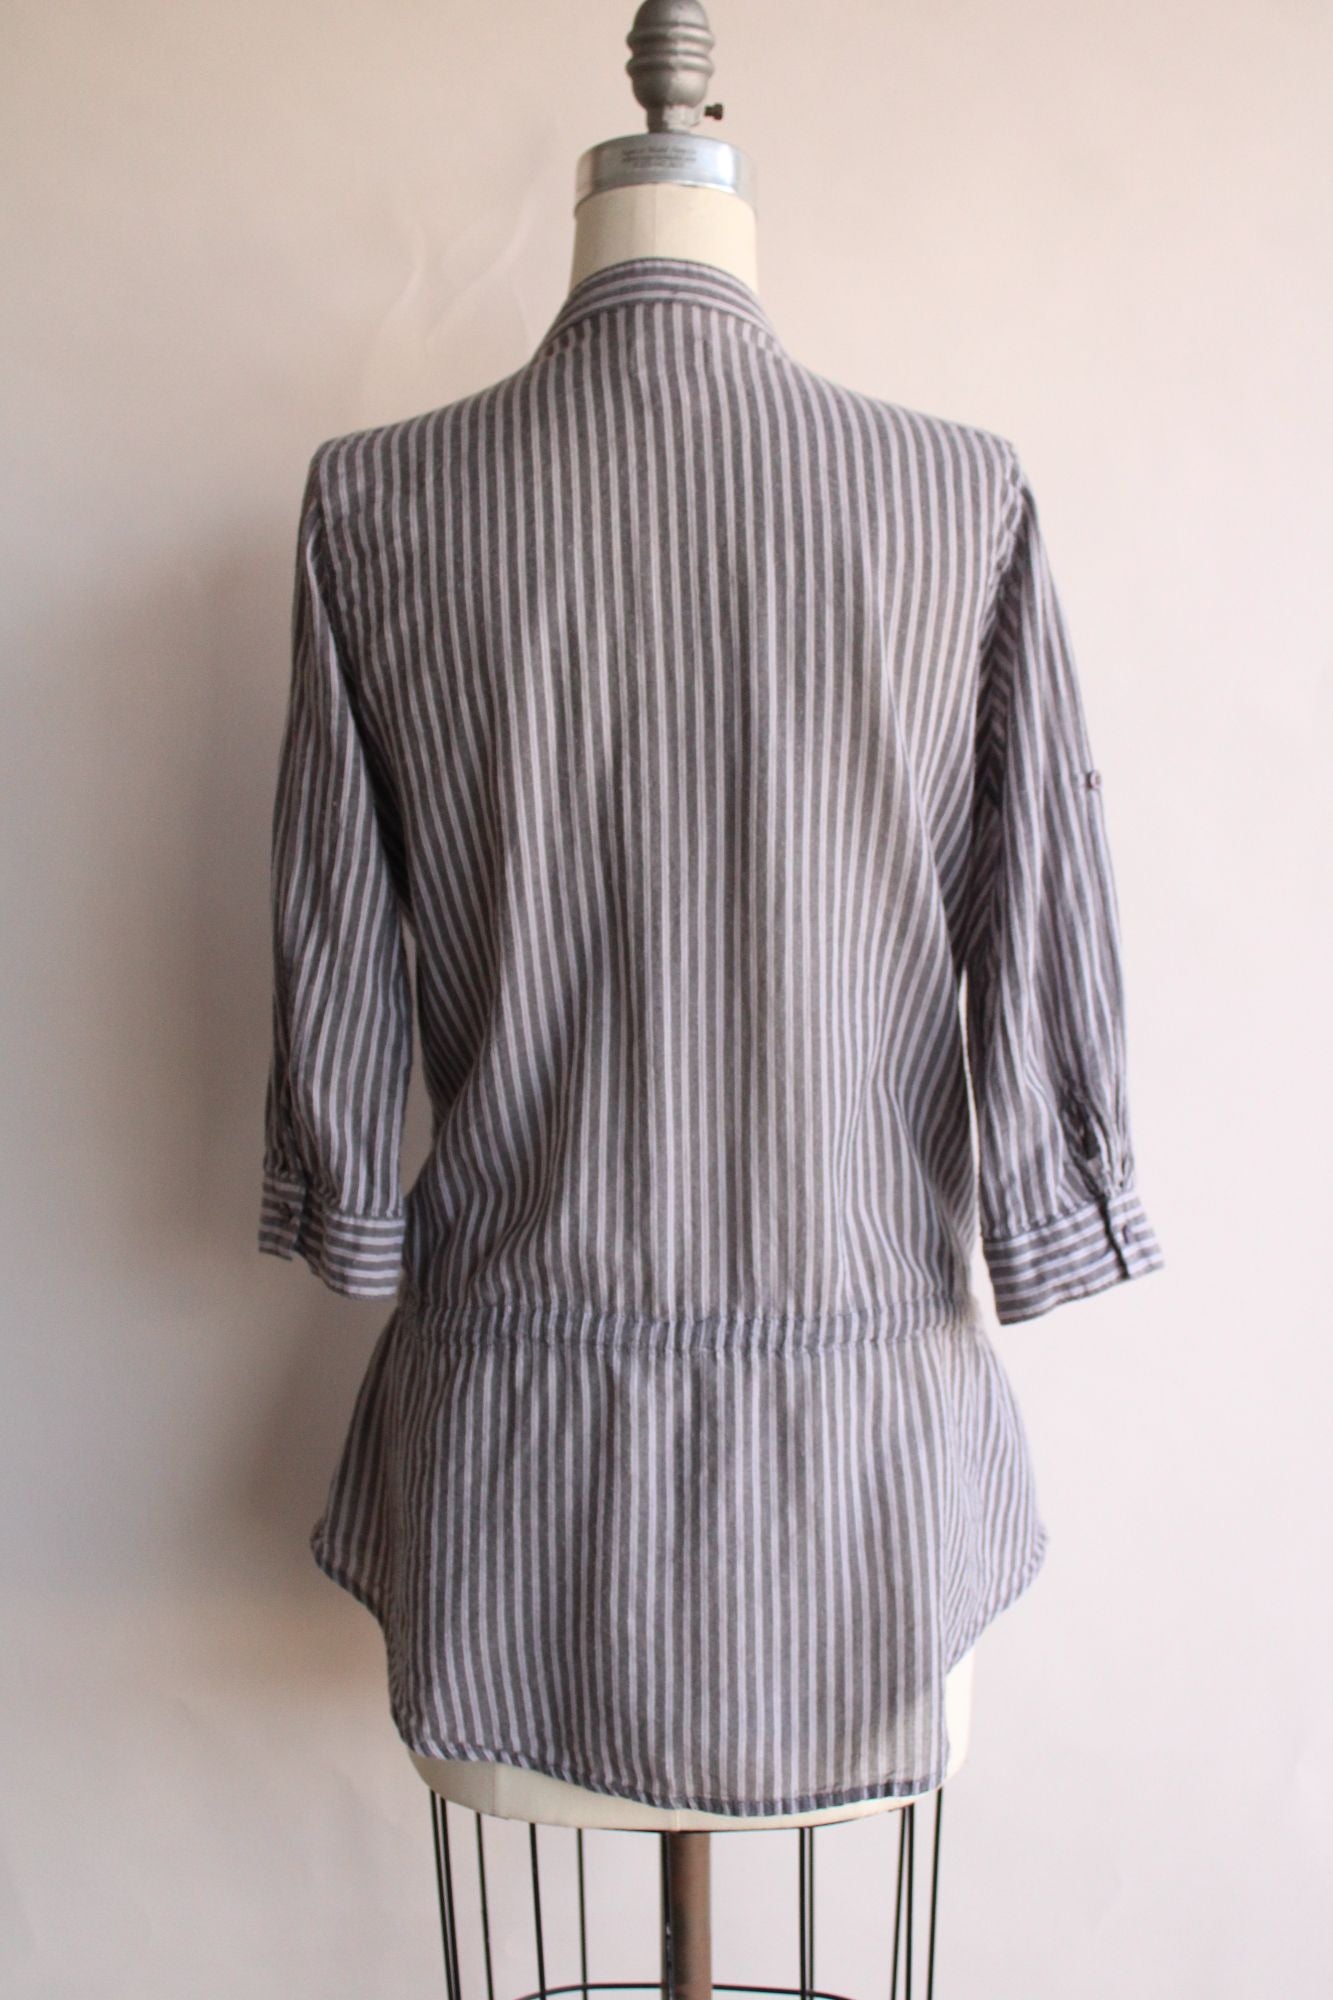 Mossimo Ladies Blouse, Size Large, Gray Pinstripe, Cuffed Sleeve, Cott –  Toadstool Farm Vintage